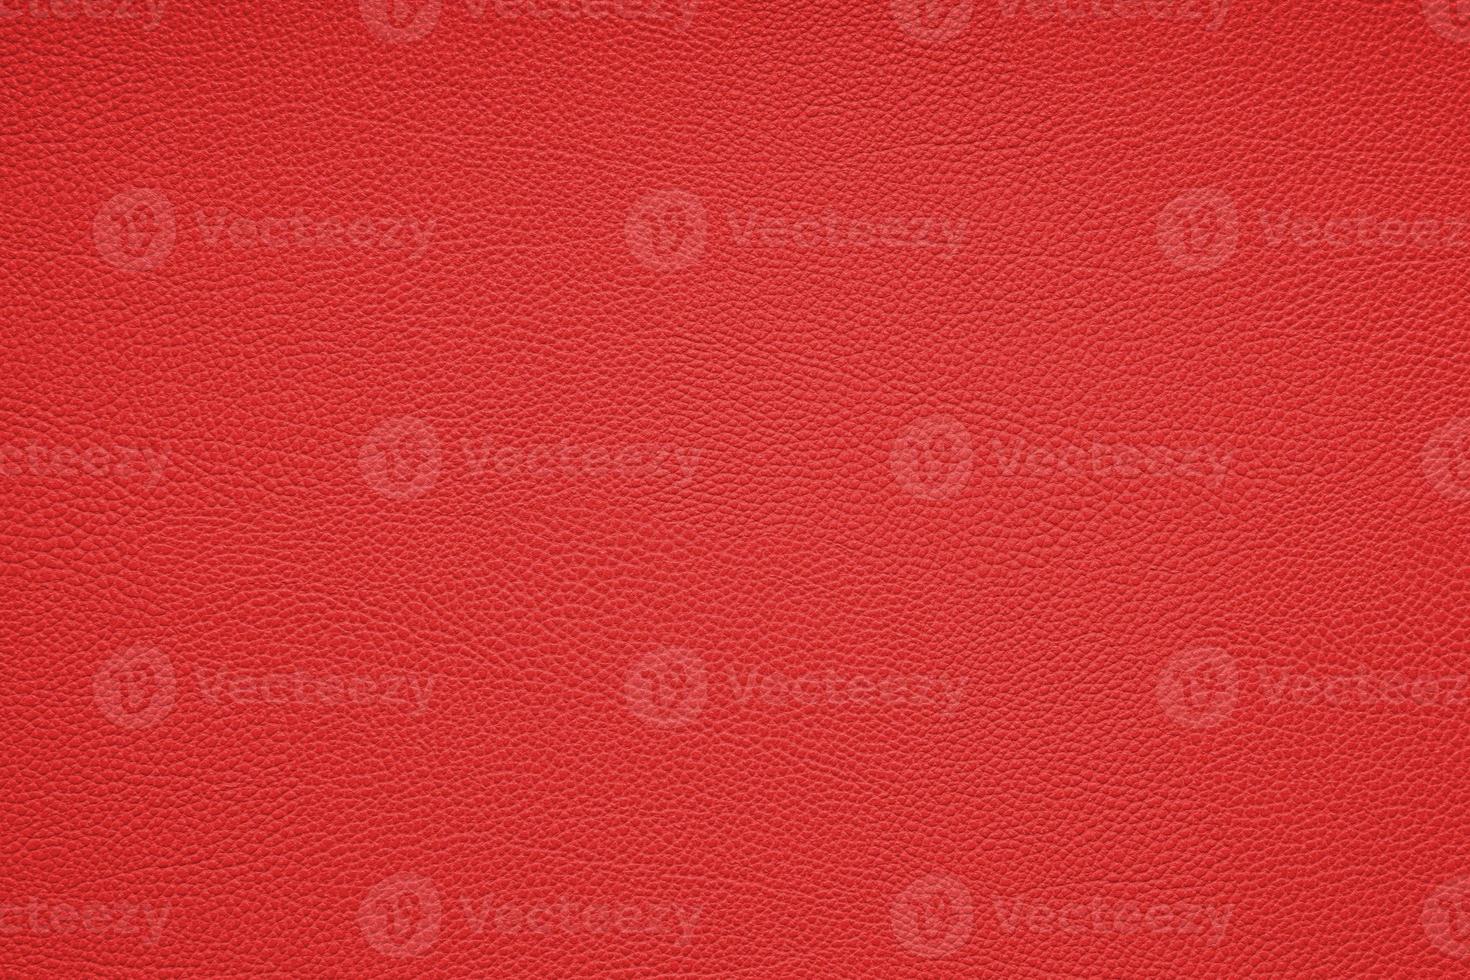 red leather texture background photo